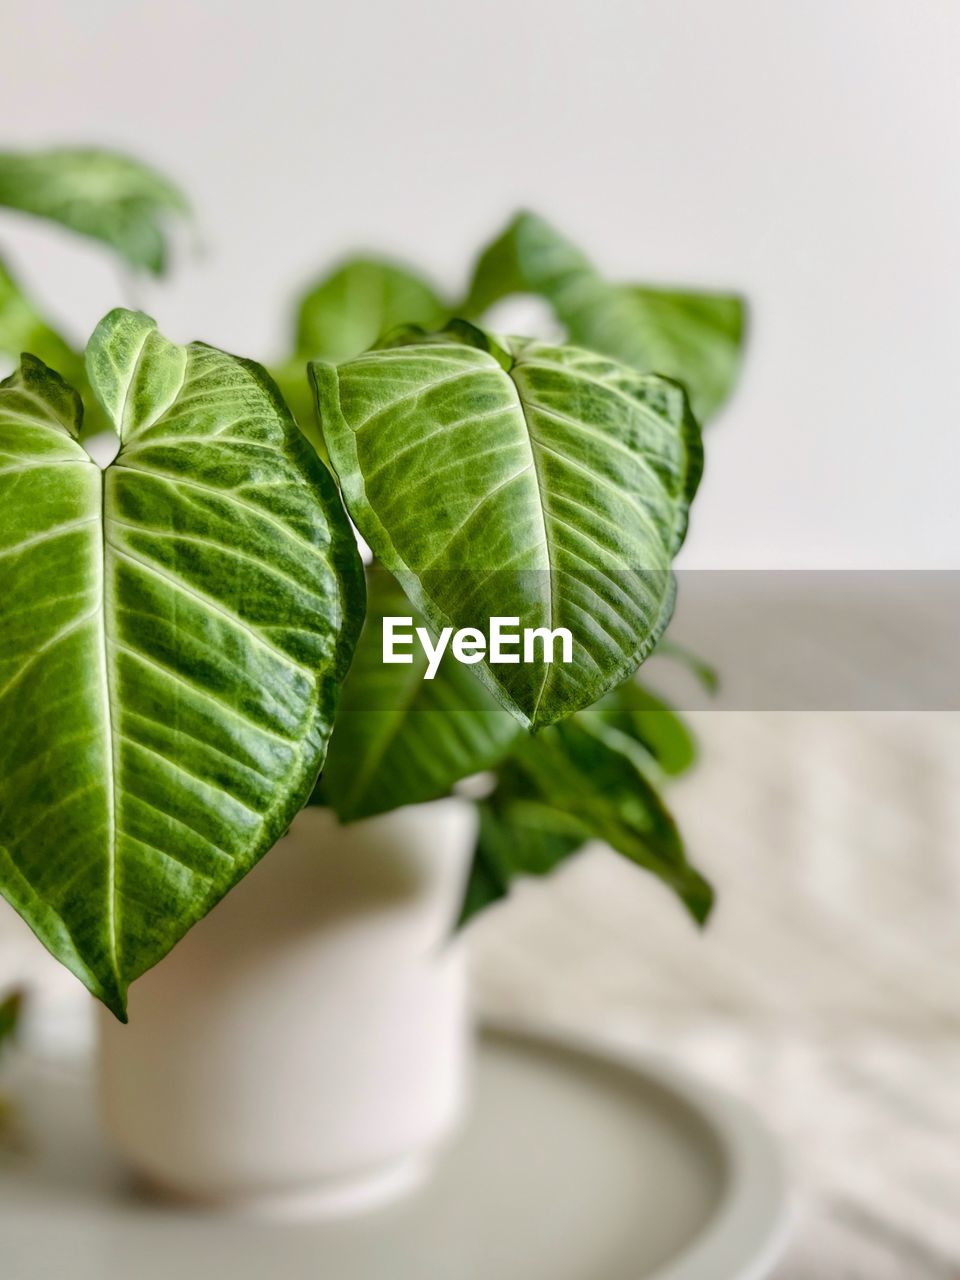 leaf, plant part, food and drink, plant, green, food, nature, produce, no people, freshness, herb, indoors, close-up, wellbeing, houseplant, flowerpot, healthy eating, basil, flower, selective focus, studio shot, drink, focus on foreground